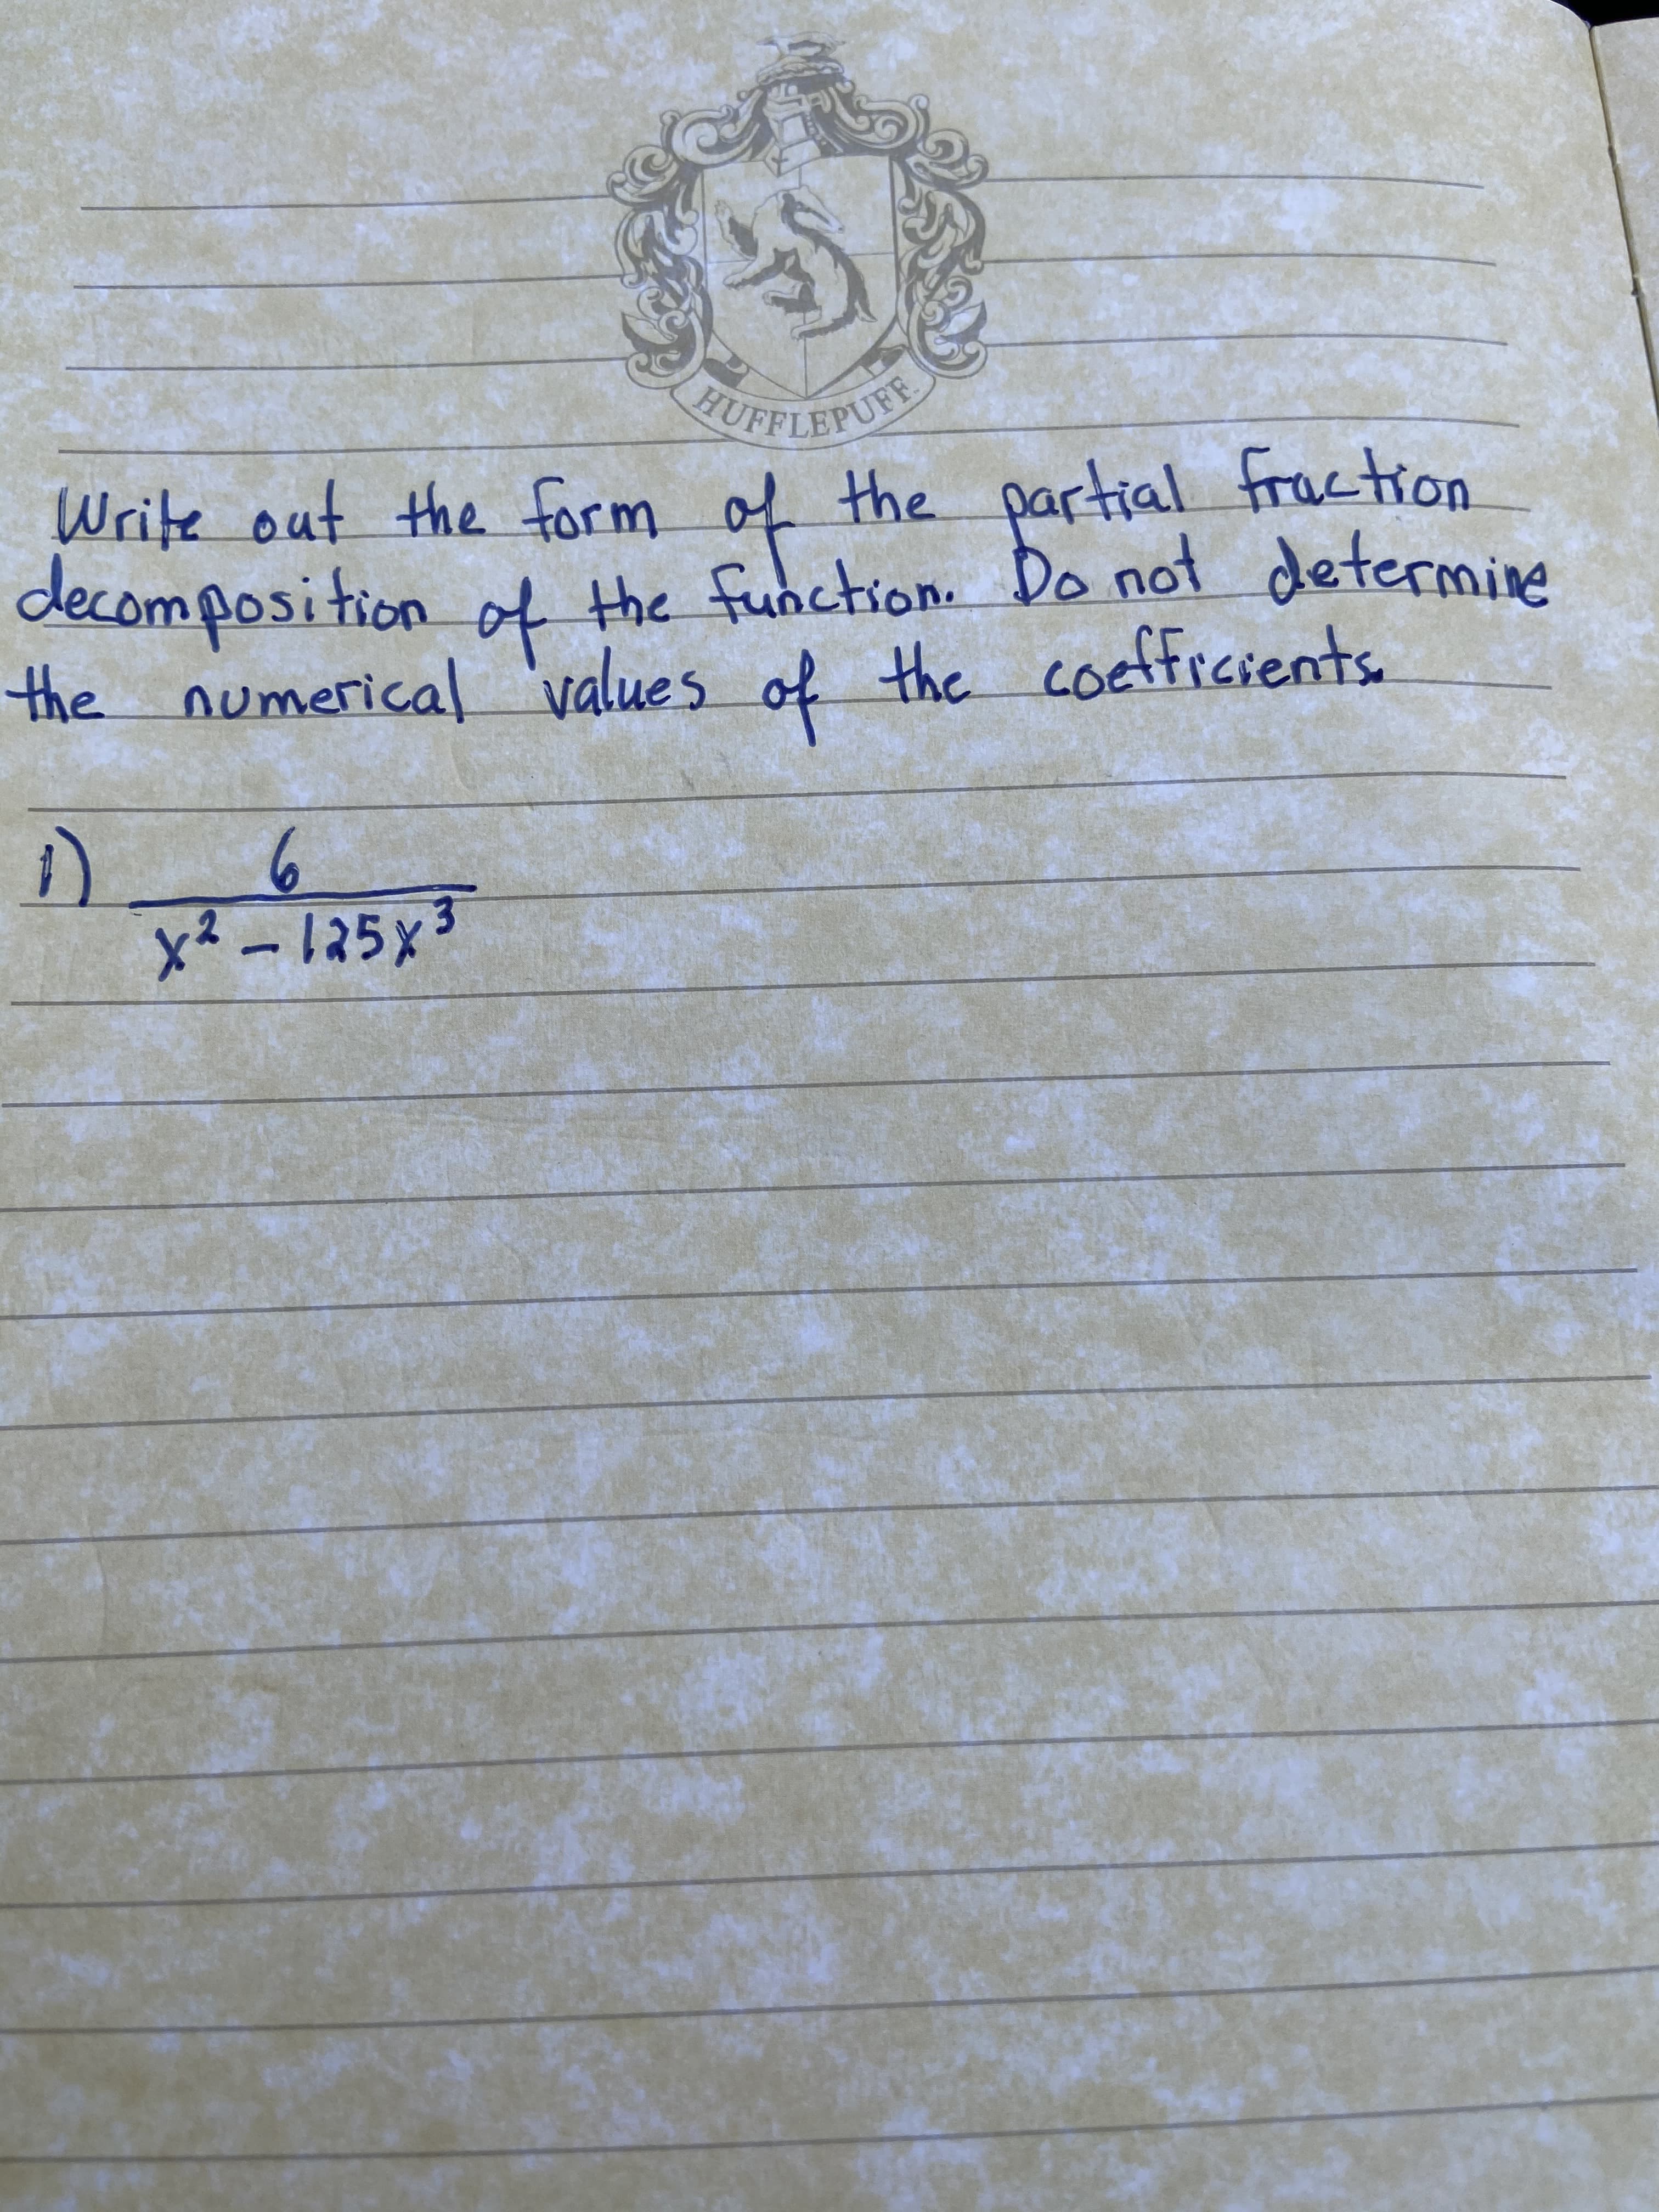 Write out the form of the partial fraction
of the function Do not determire
the numerical 'values the coefficients
decomposition
of
6
x2-125x3
